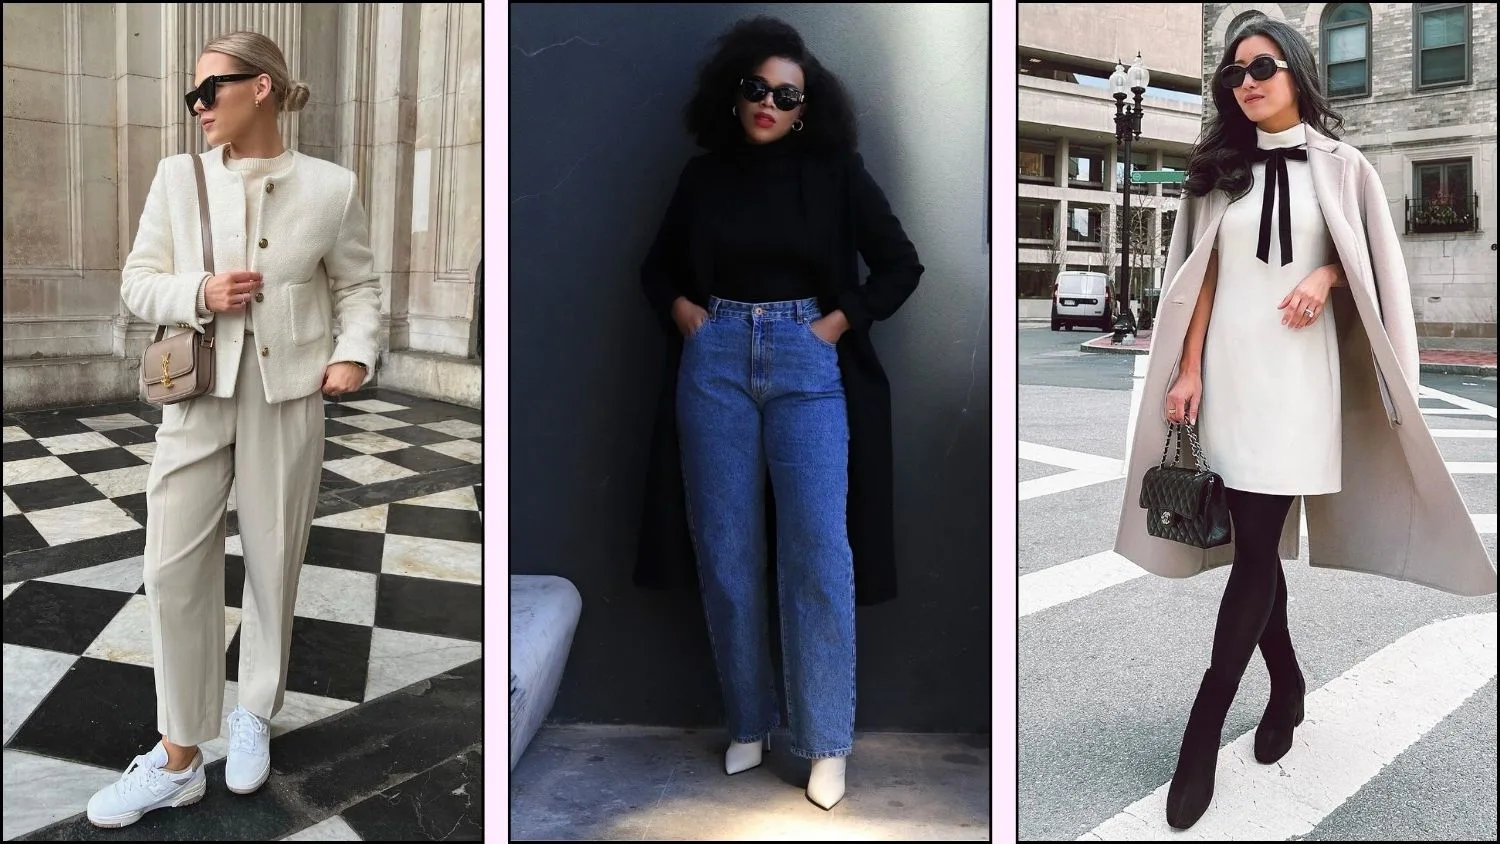 A collage of short women in stylish outfits